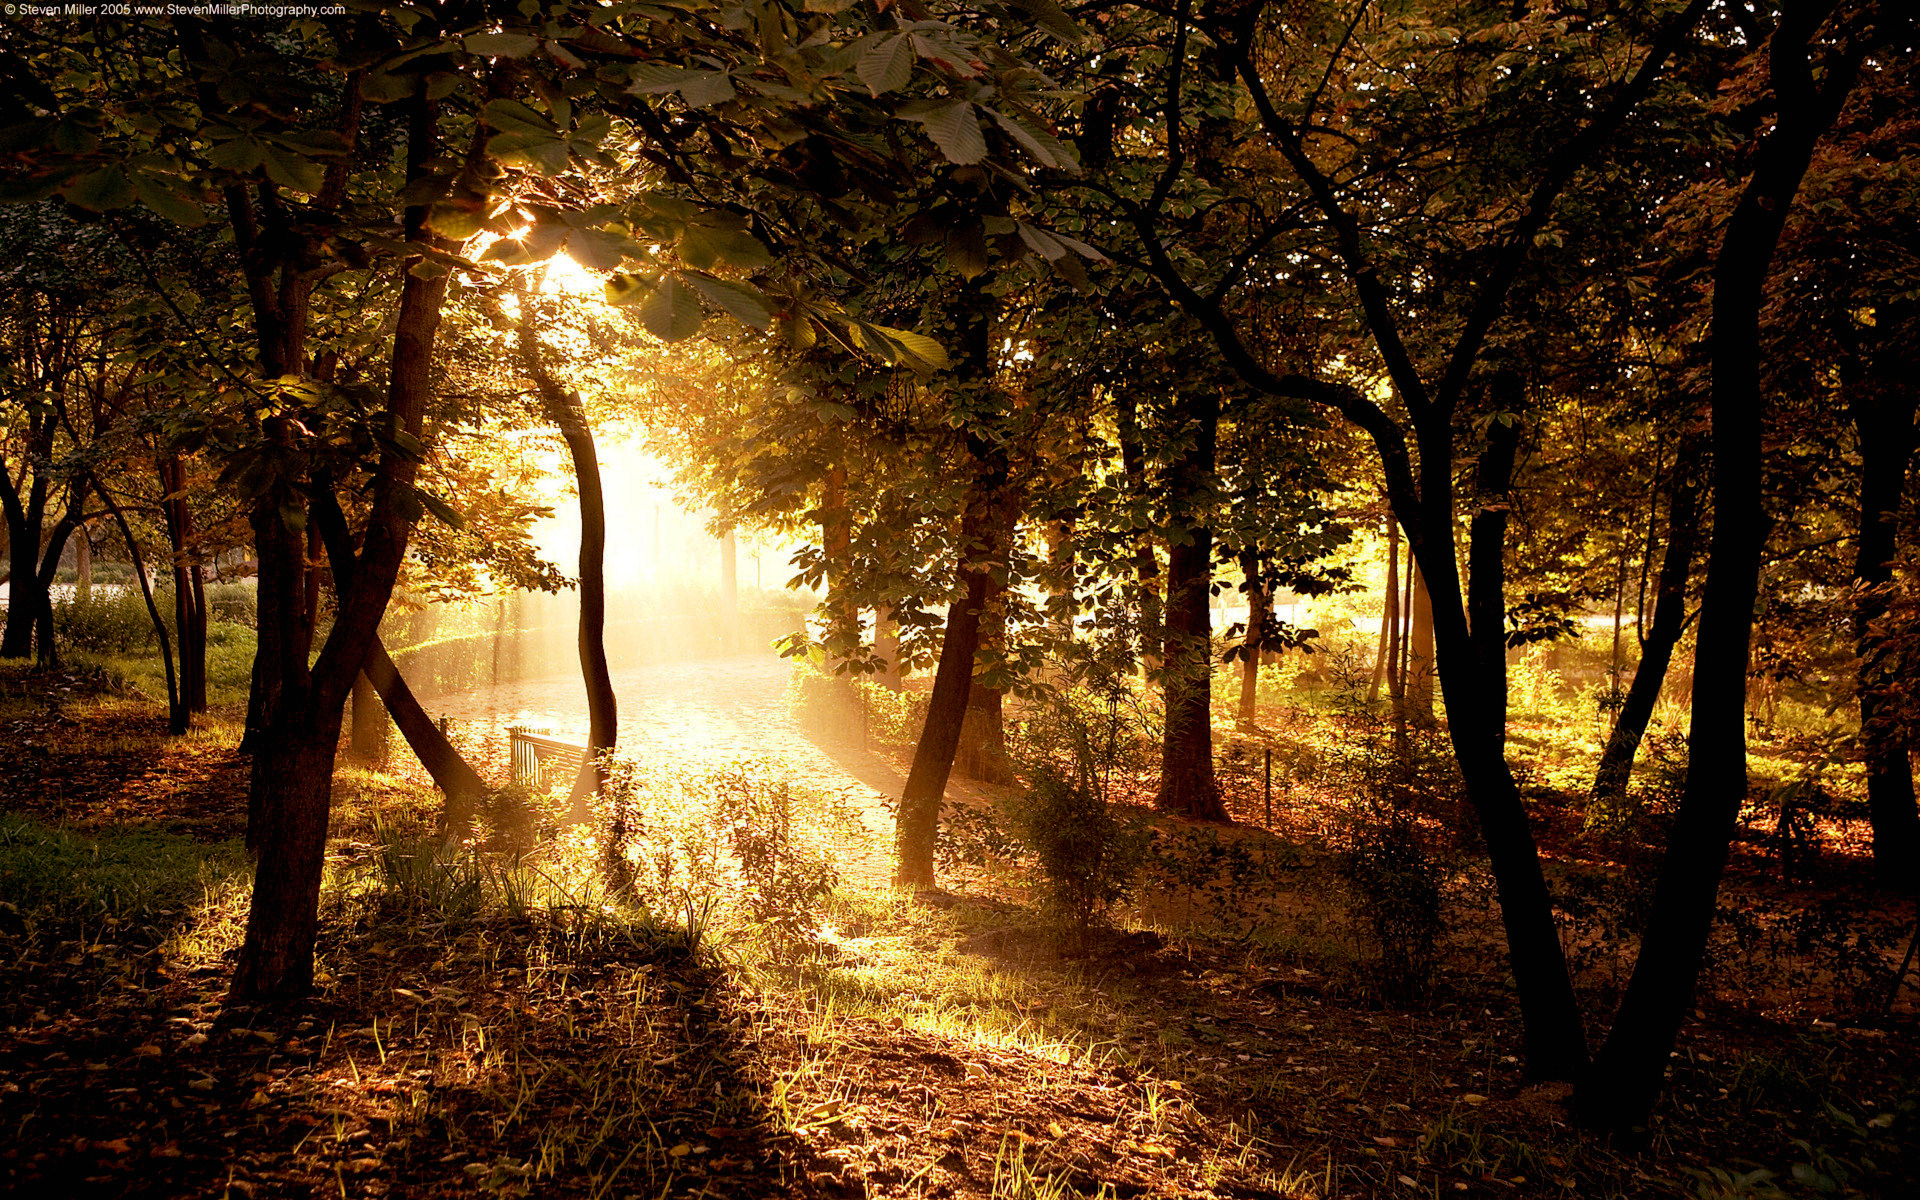 Quiet, ethereal forest scenery illuminated by golden sunlight filtering through the trees.